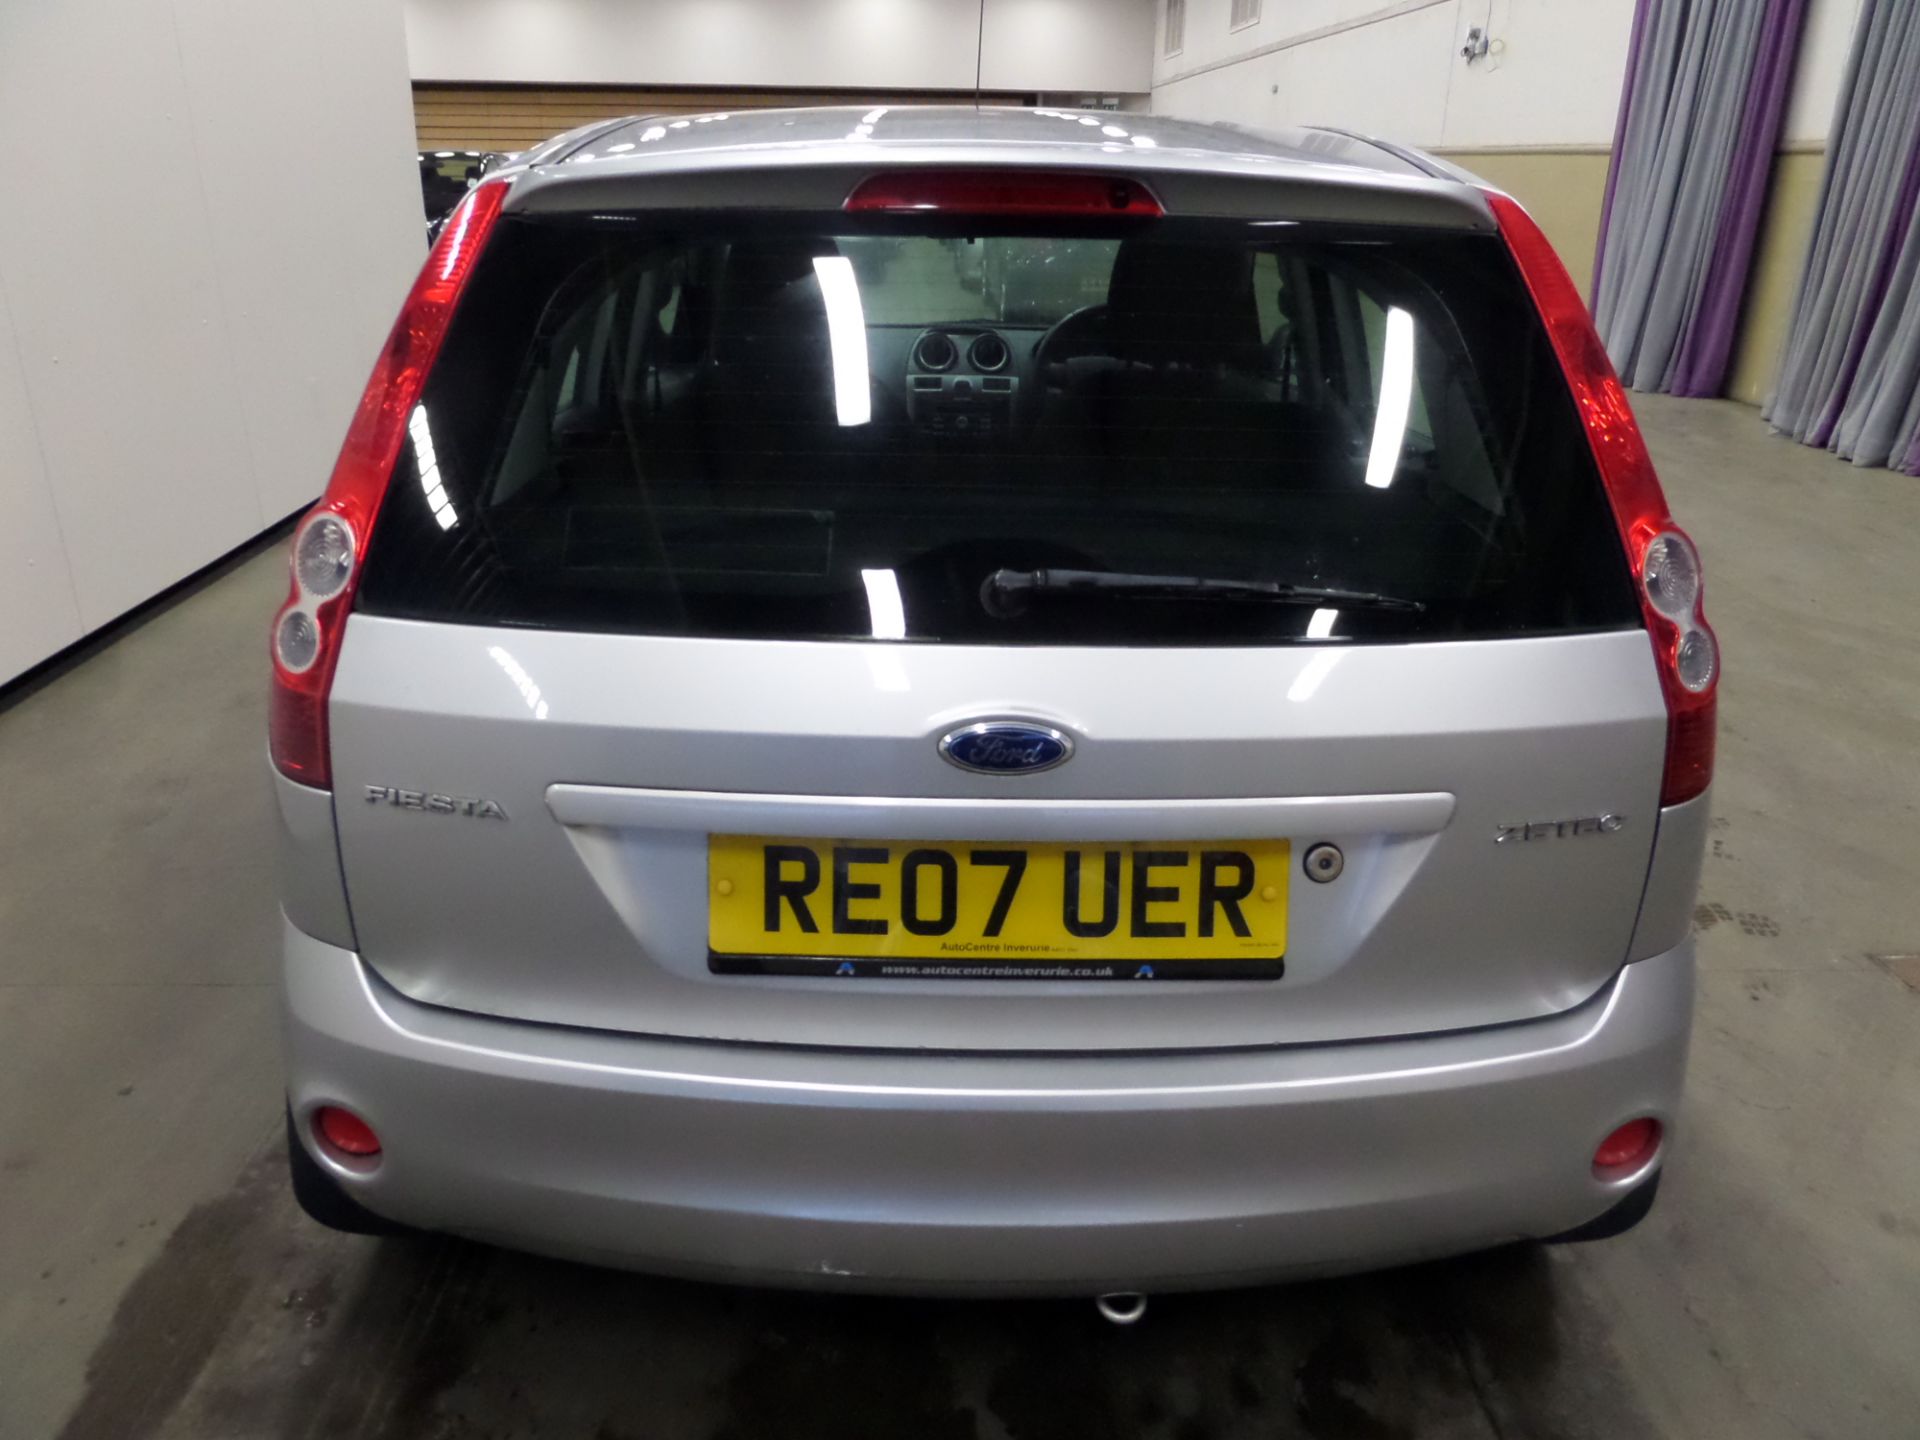 Ford Fiesta Zetec Climate S-a - 1388cc 5 Door - Image 4 of 9